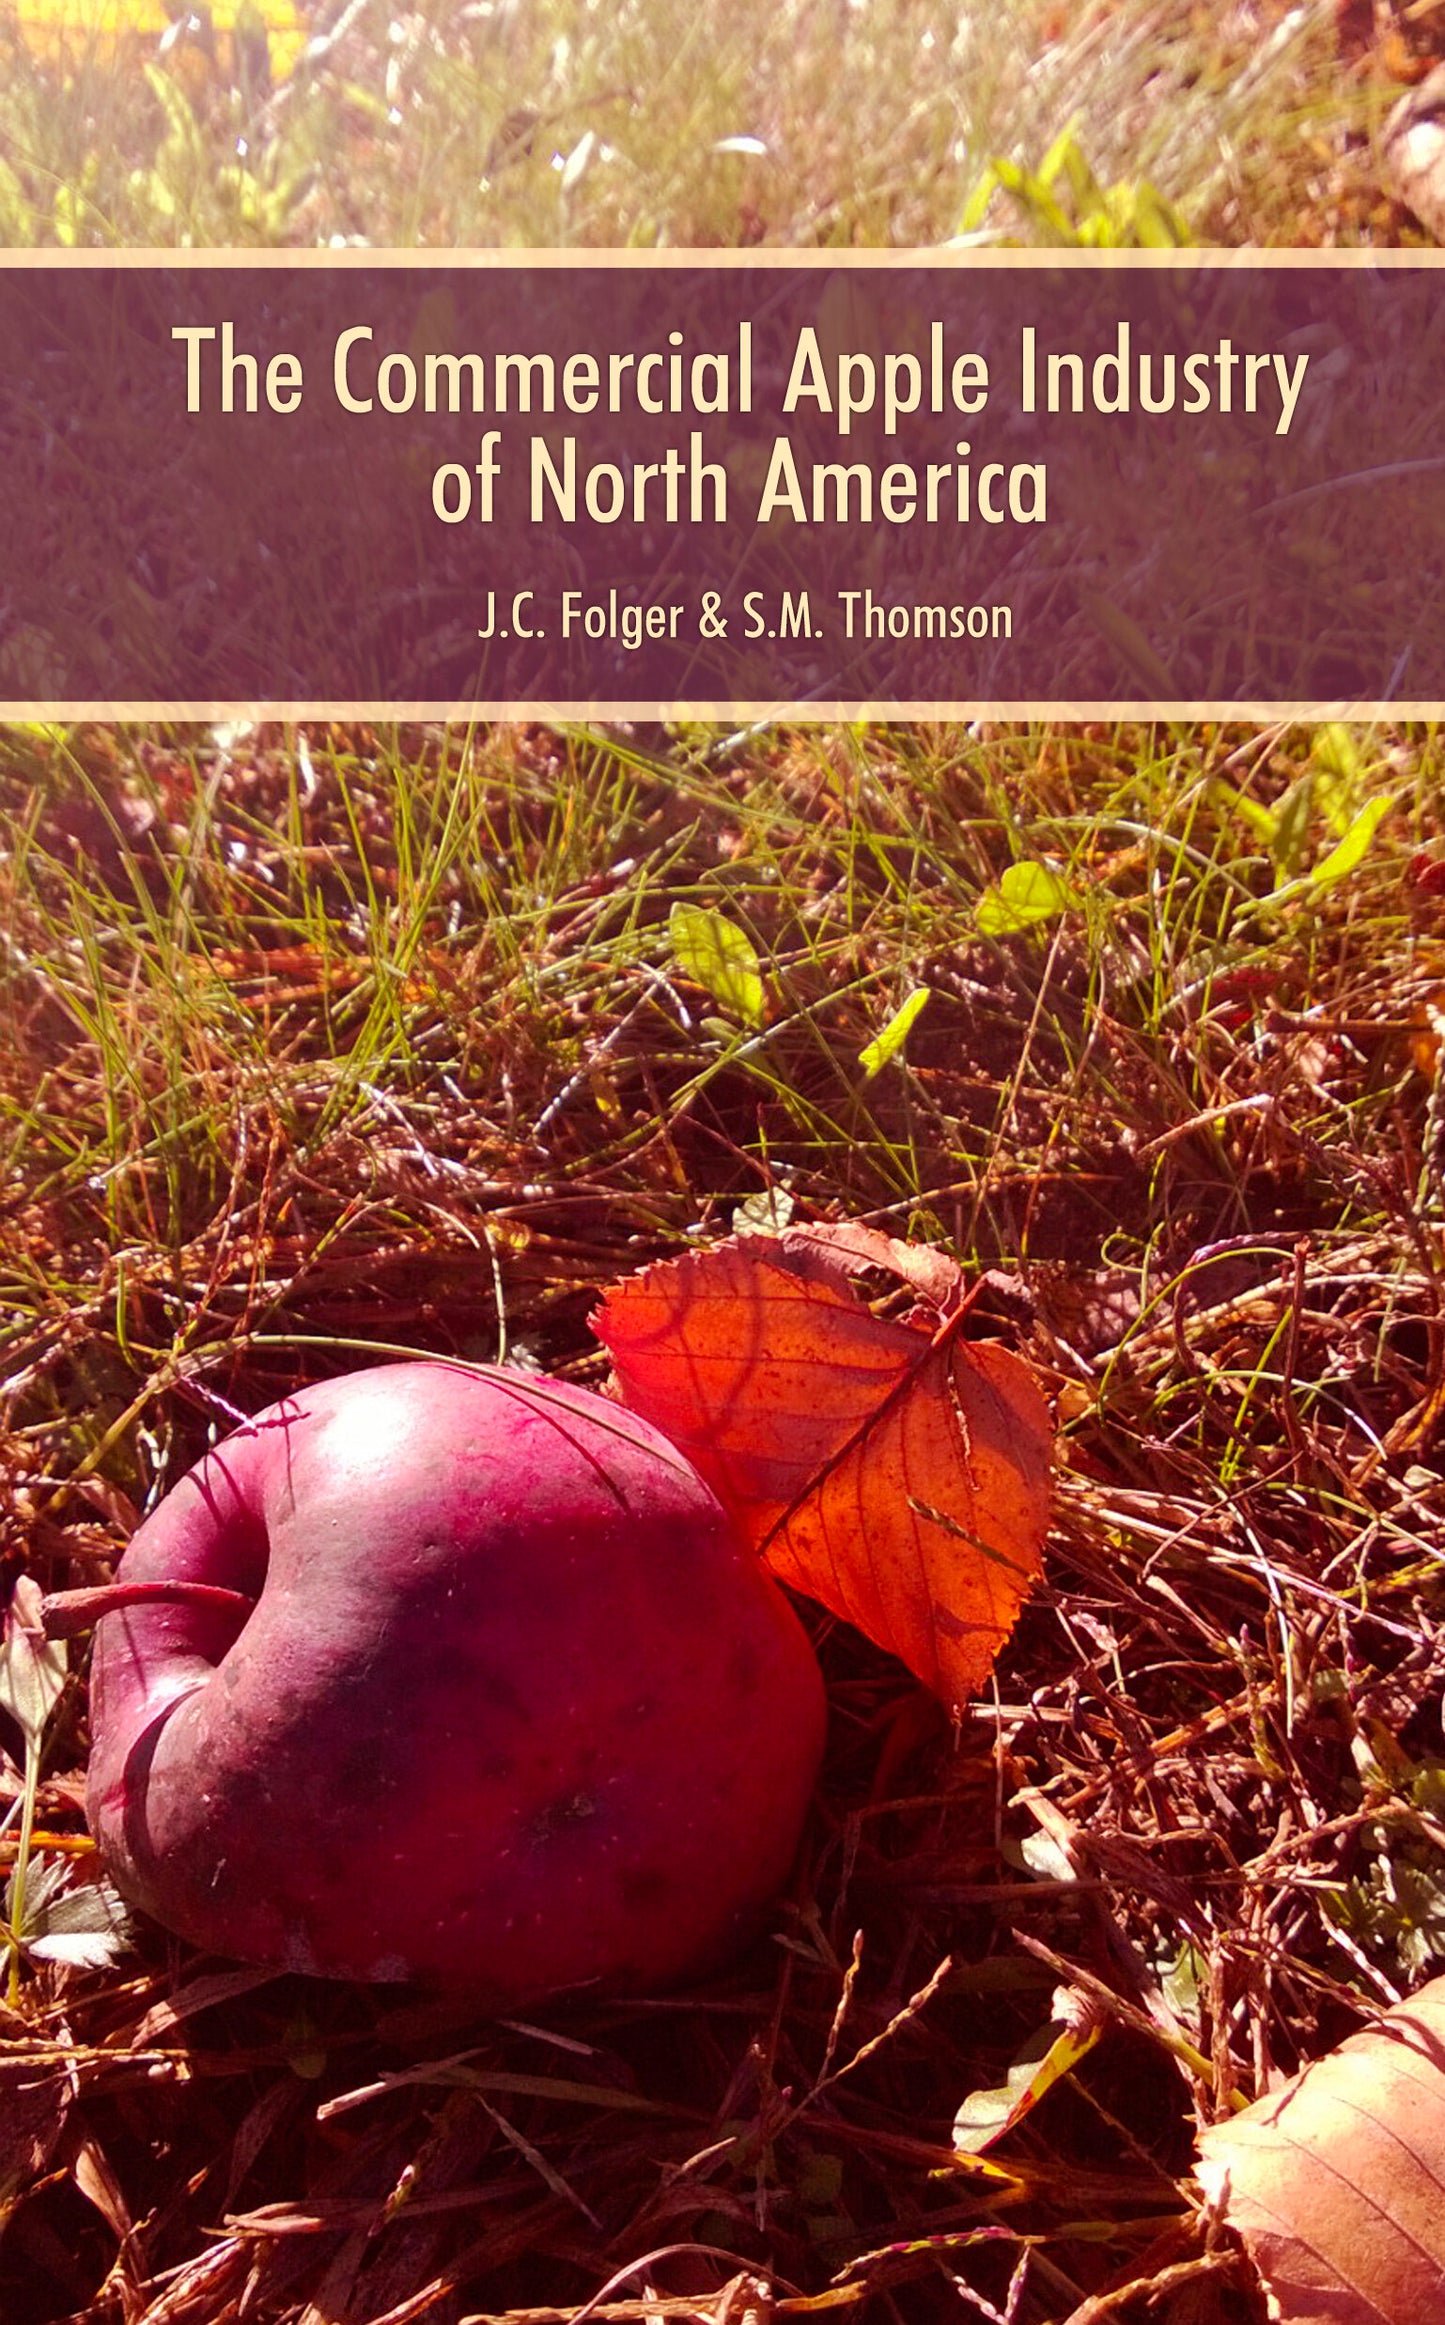 The Commercial Apple Industry of North America